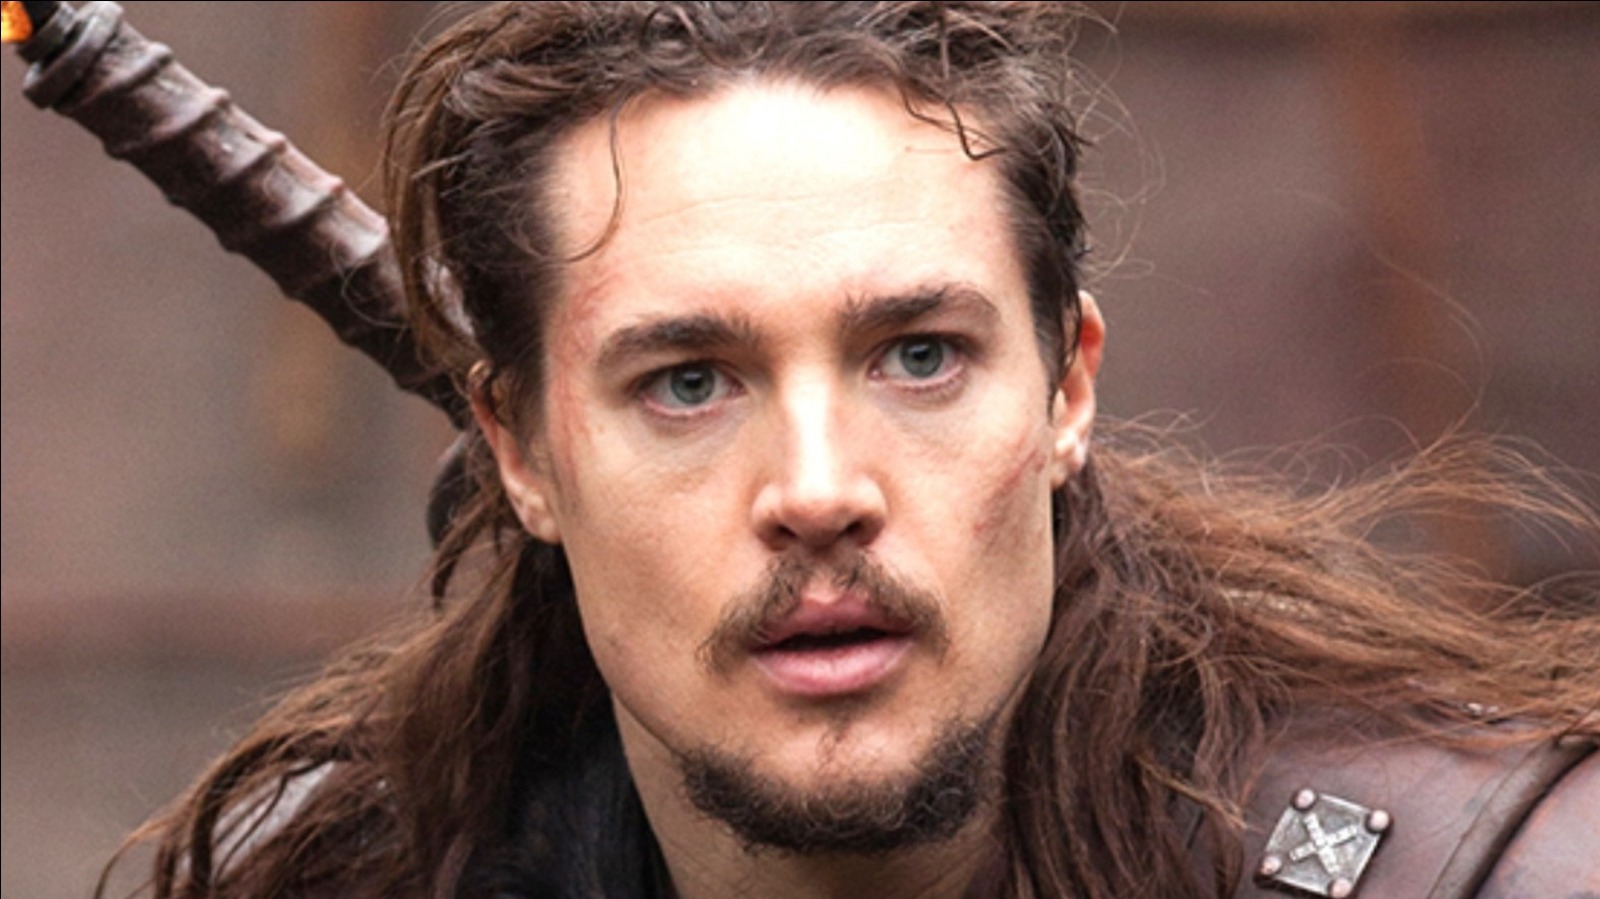 Uhtred of Bebbanburg - A Fictional Character?